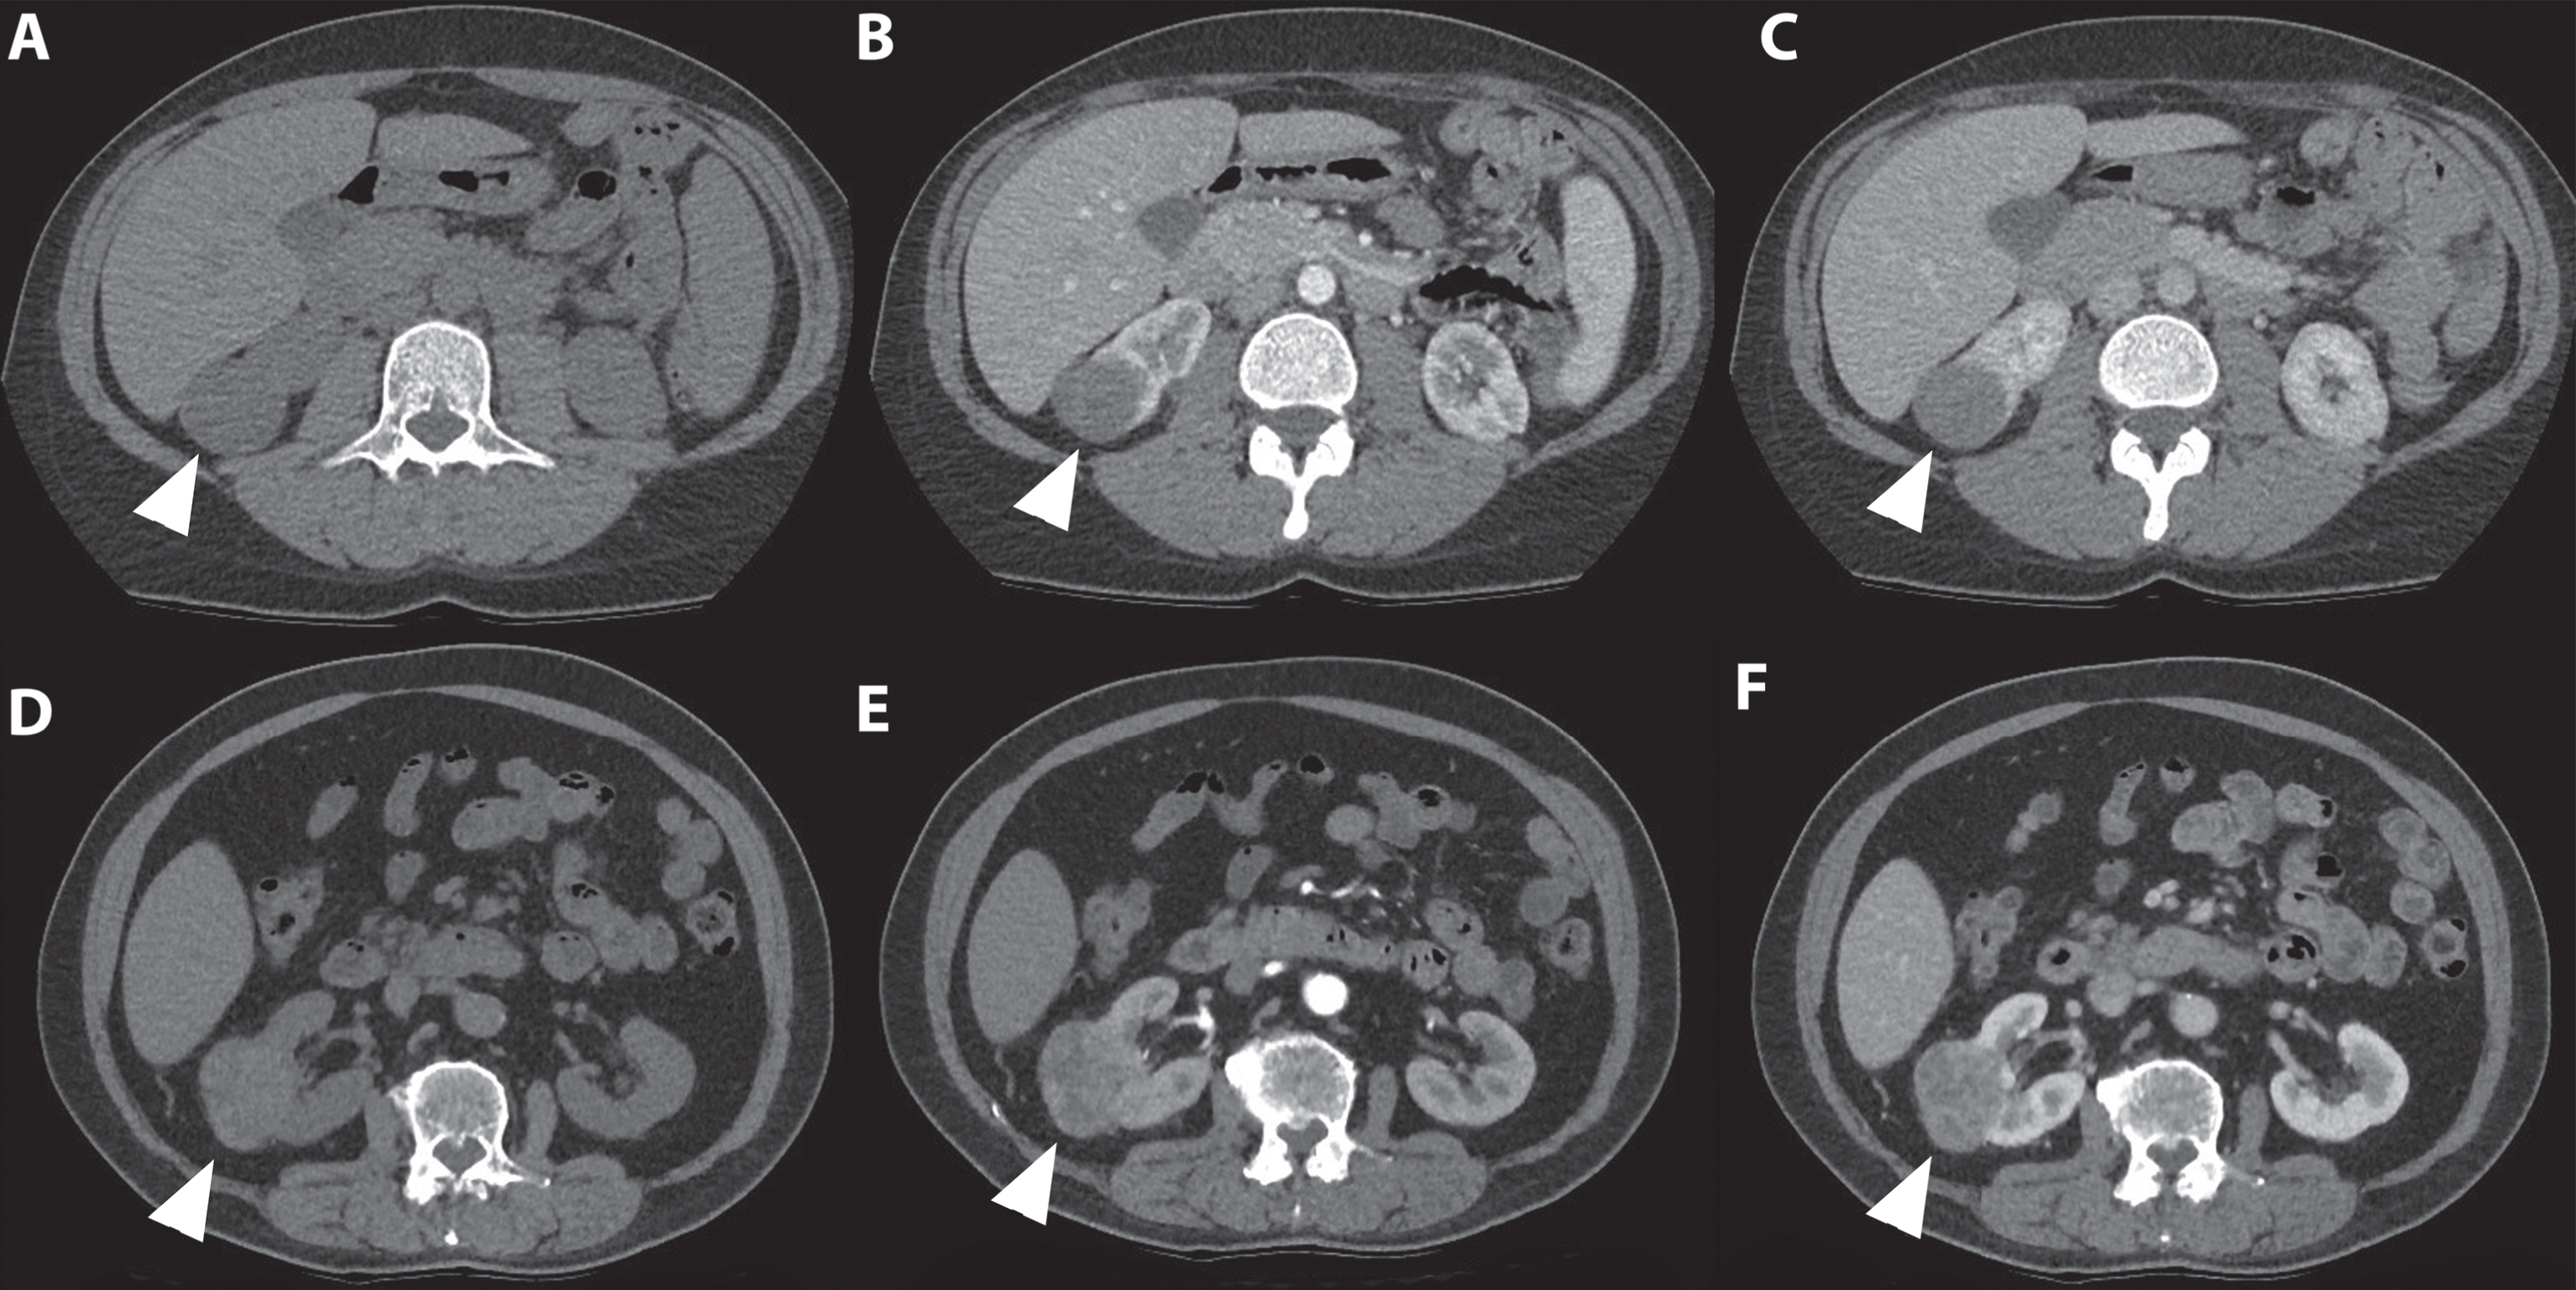 In this figure the difference in appearance and enhancing pattern of clear cell and papillary renal cell carcinoma are shown. The first case (A-C) concerns a 41-year-old women referred for analysis of an incidentaloma of the right kidney detected on ultrasound. A 3-phase CT scan showed a 36-mm large tumor of the lower pole of the right kidney with a typical gradual enhancement pattern with, as opposed to the clear cell RCC case, no washout in the nephrogenic phase. On unenhanced CT, the tumor appears homogeneous and the Hounsfield unit value of the tumor was 31. (A) The corticomedullary (B) and nephrogenic phase (C) showed homogeneous enhancement of the tumor with Hounsfield unit values of 31 and 68, respectively. Histopathology after robot-assisted partial nephrectomy confirmed the diagnosis of a 38-mm large, Furhman grade 4 papillary renal cell carcinoma. The second case (D-F) concerns a 67-year-old man in whom an incidentaloma in the right kidney was found on MRI of the spinal canal. The tumor was evaluated through a CT scan which showed a 67 mm large, interpolar tumor of the right kidney. The non-contrast phase showed a heterogeneous aspect with mixed attenuation (A), in the corticomedullary phase strong enhancement of the solid parts is seen (B) with subsequent washout in the nephrogenic phase (C). The latter is best seen when comparing the enhancement with the renal cortex.